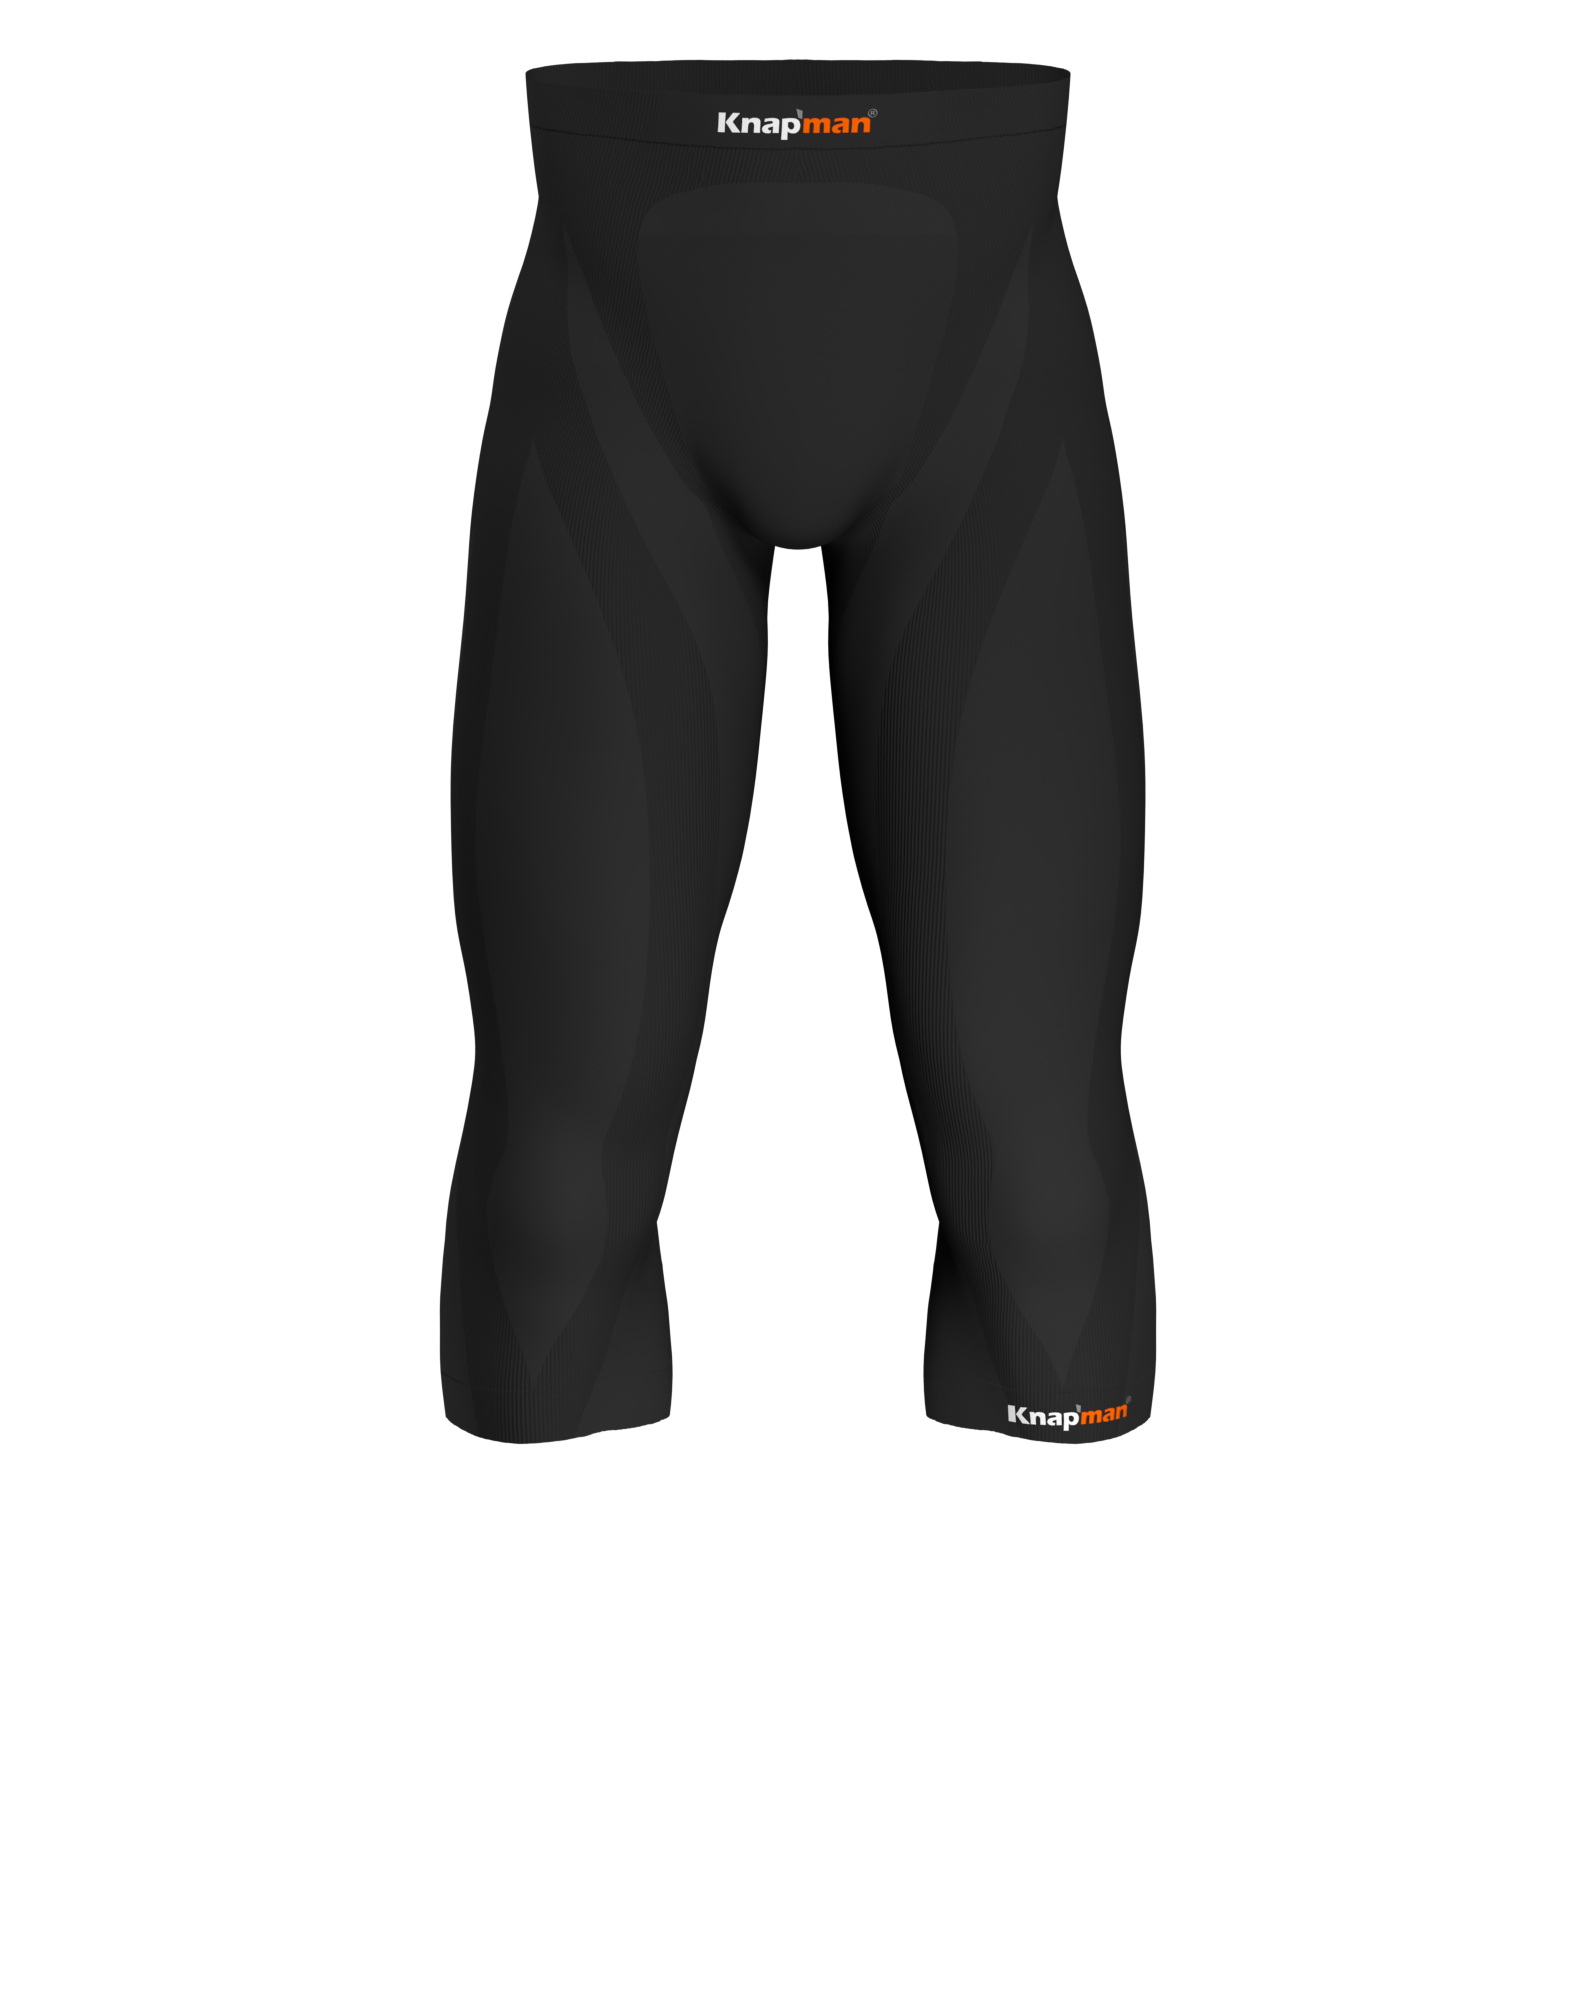 Knap'man Zoned Compression Tights 3/4 - 25%